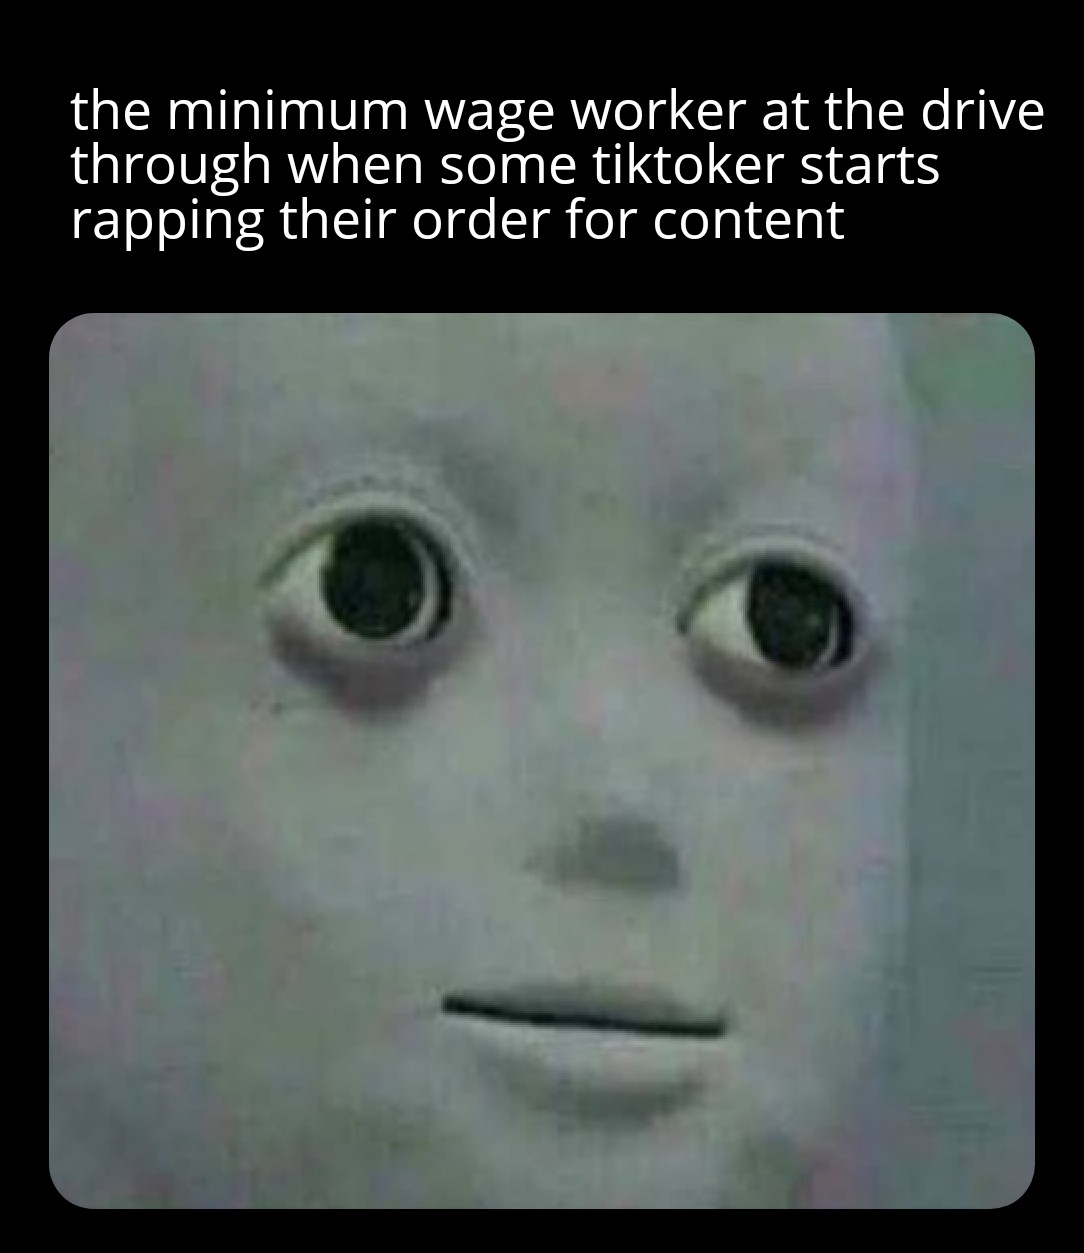 dank memes - april fools dank memes - the minimum wage worker at the drive through when some tiktoker starts rapping their order for content